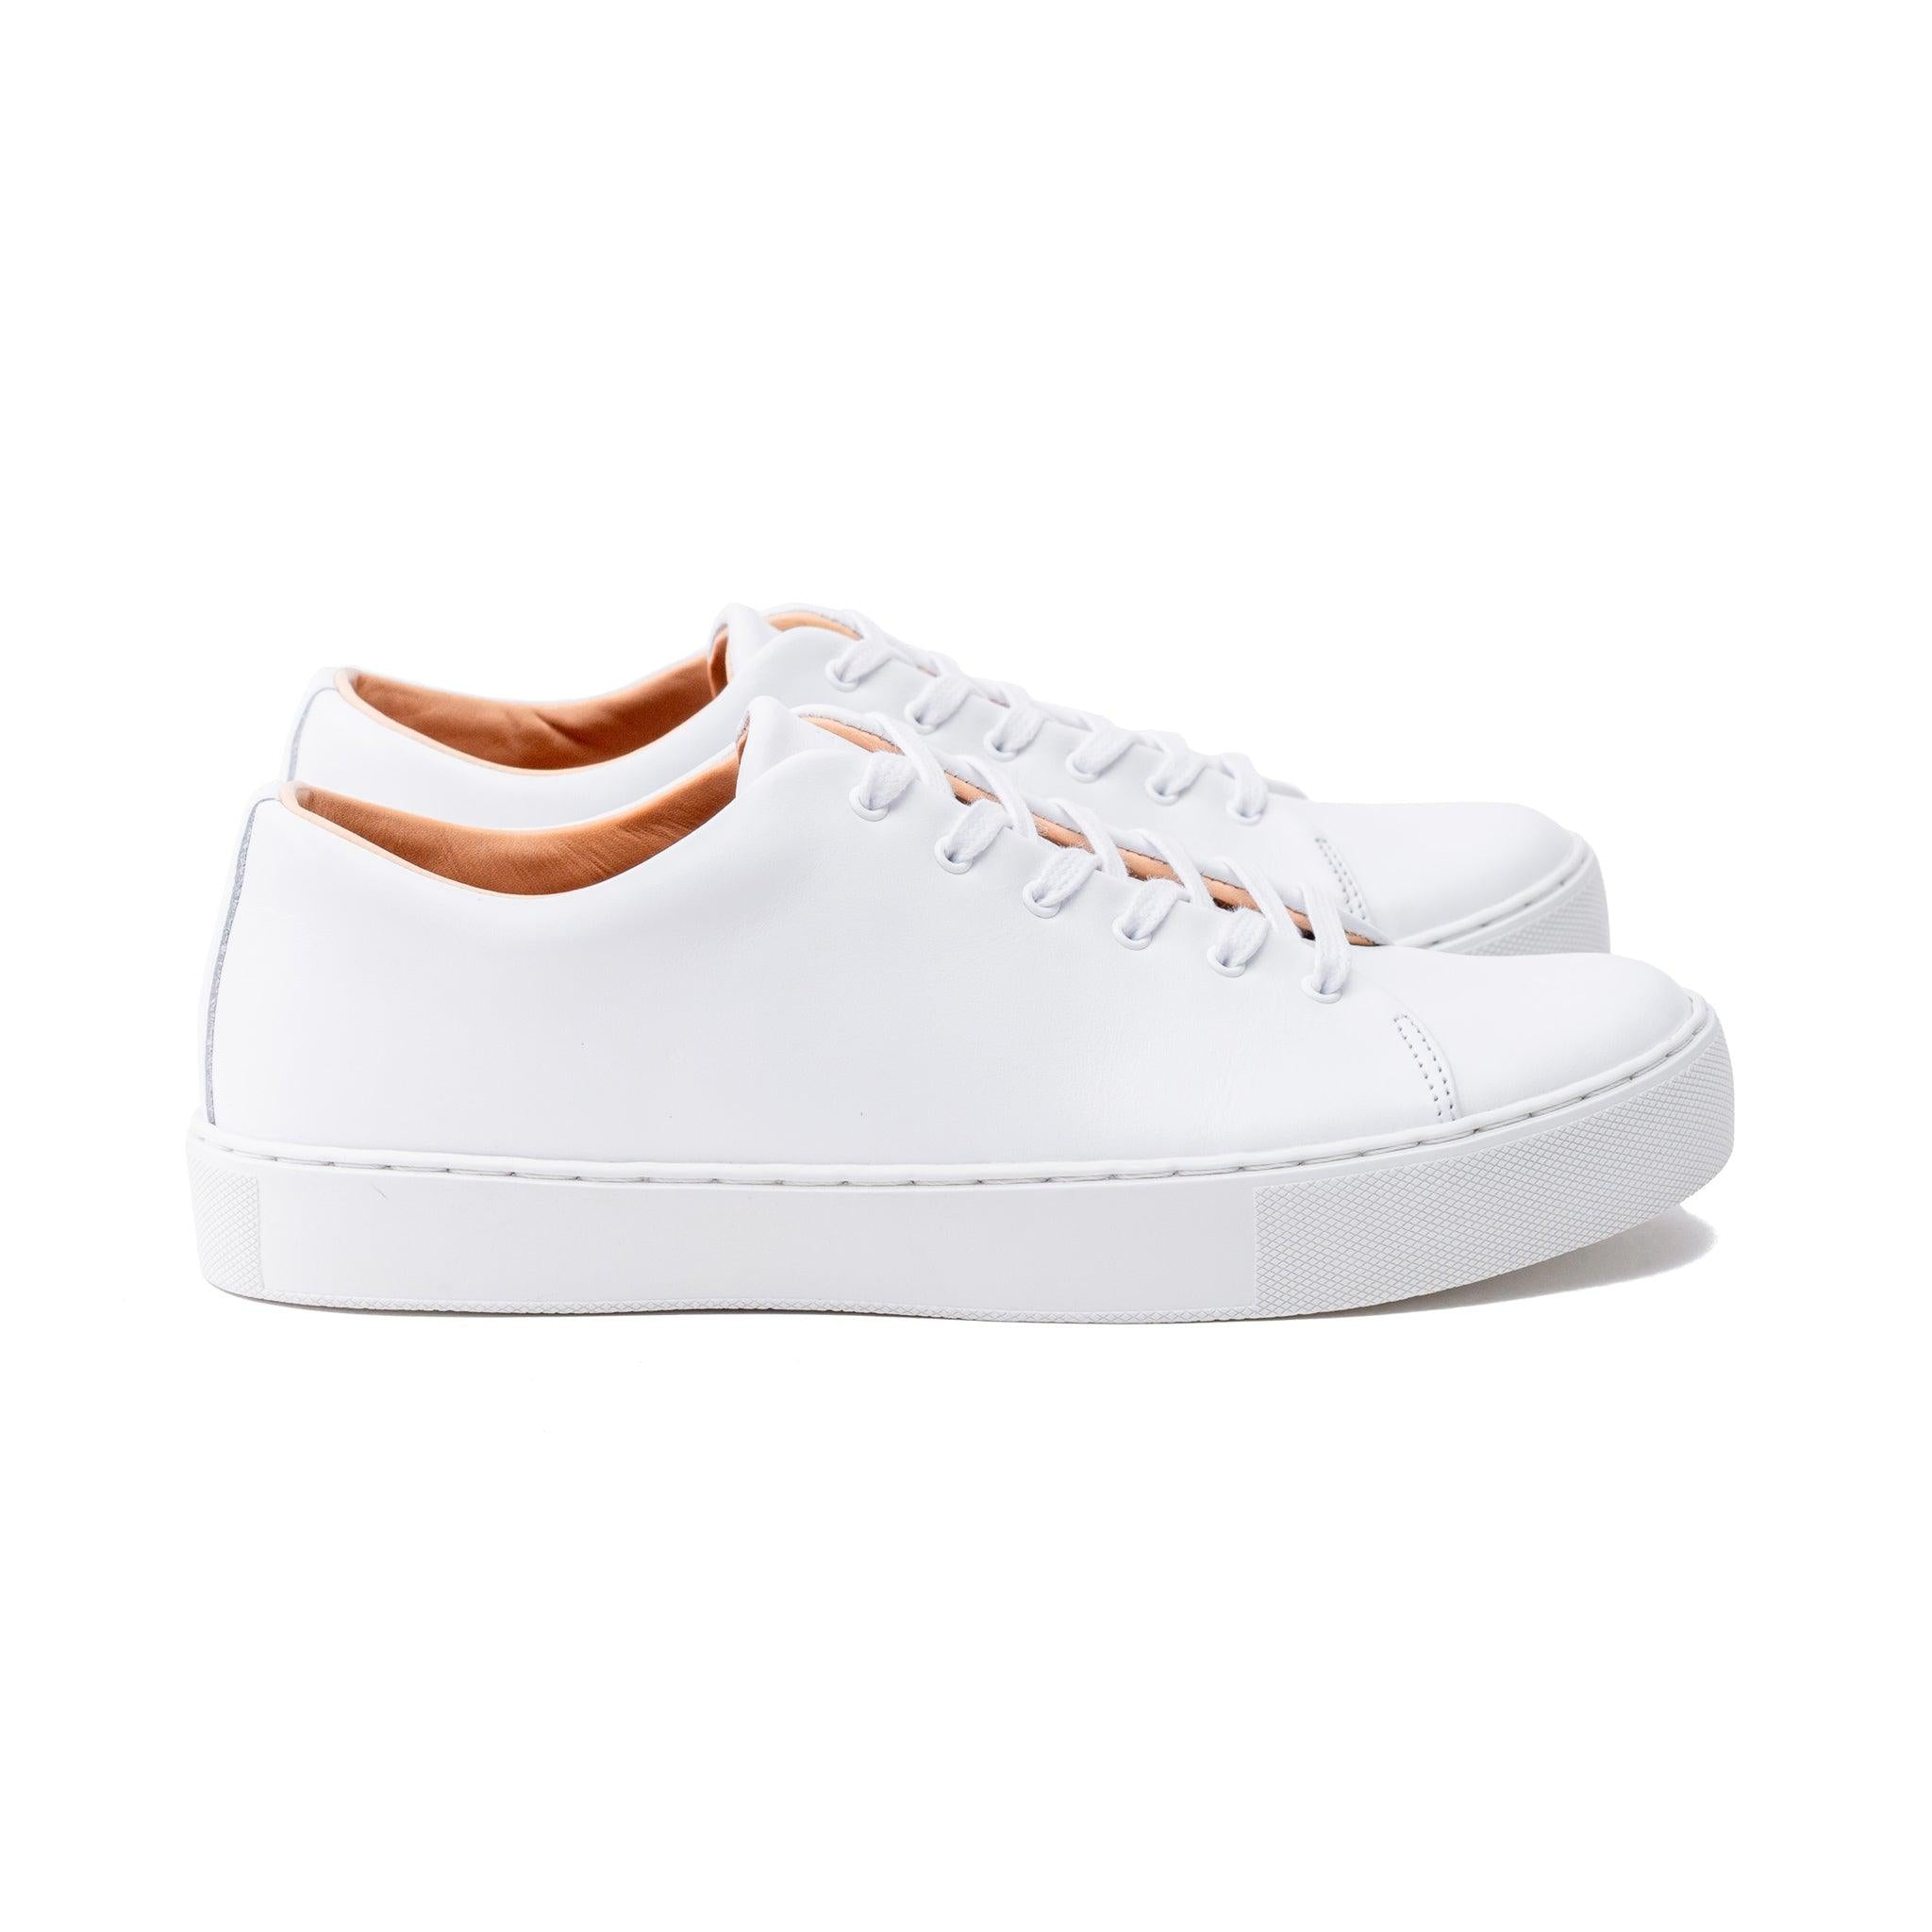 all white leather sneakers